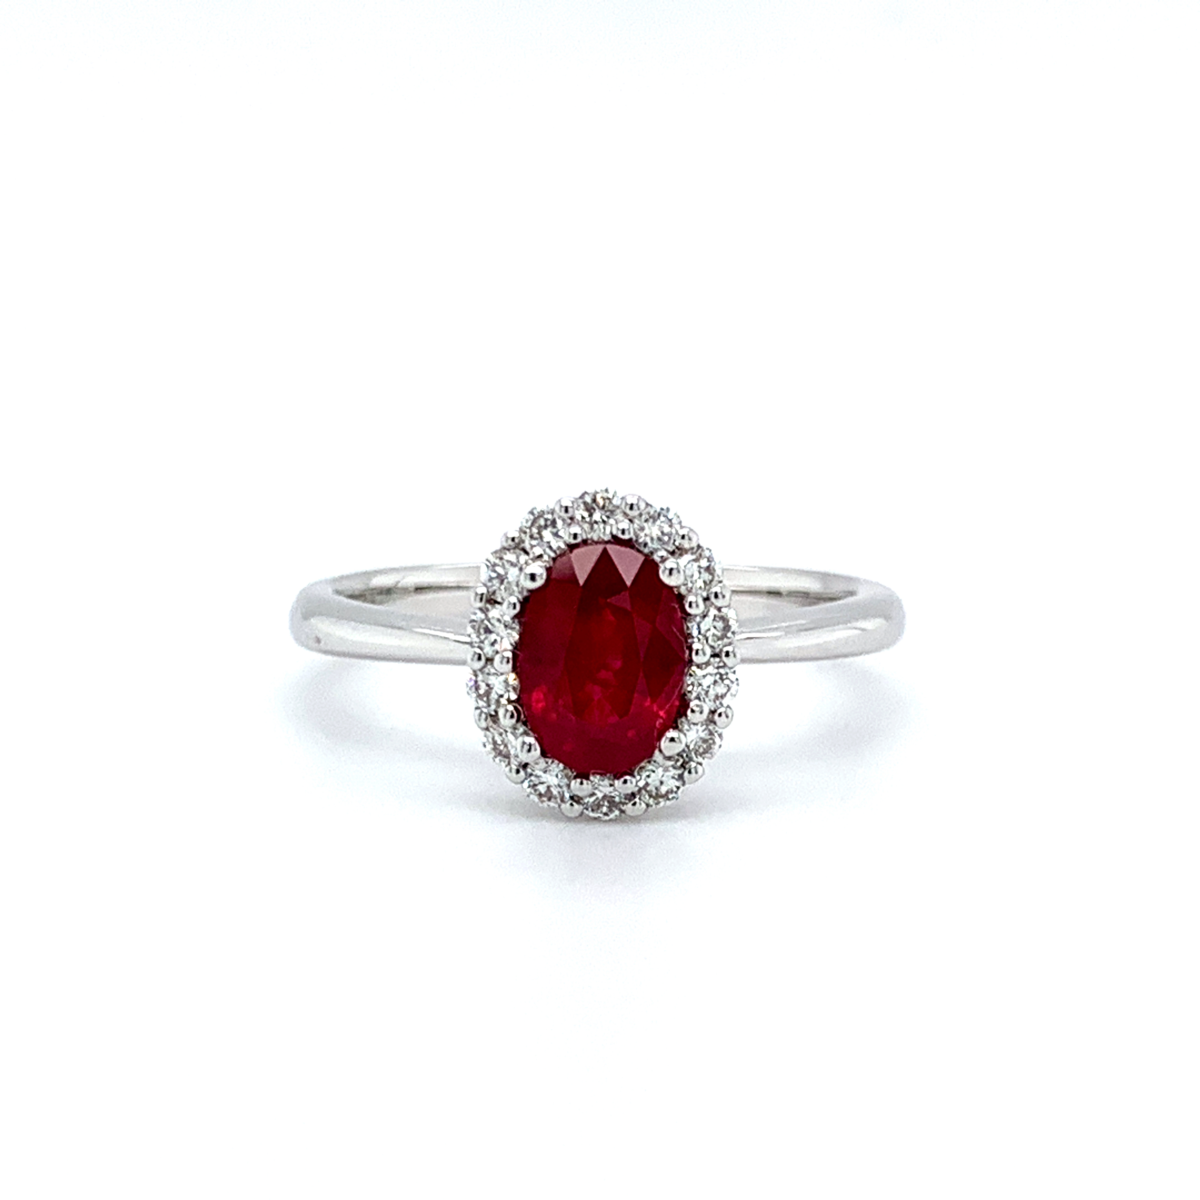 Rikki Oval Cut Ruby Halo Engagement Ring